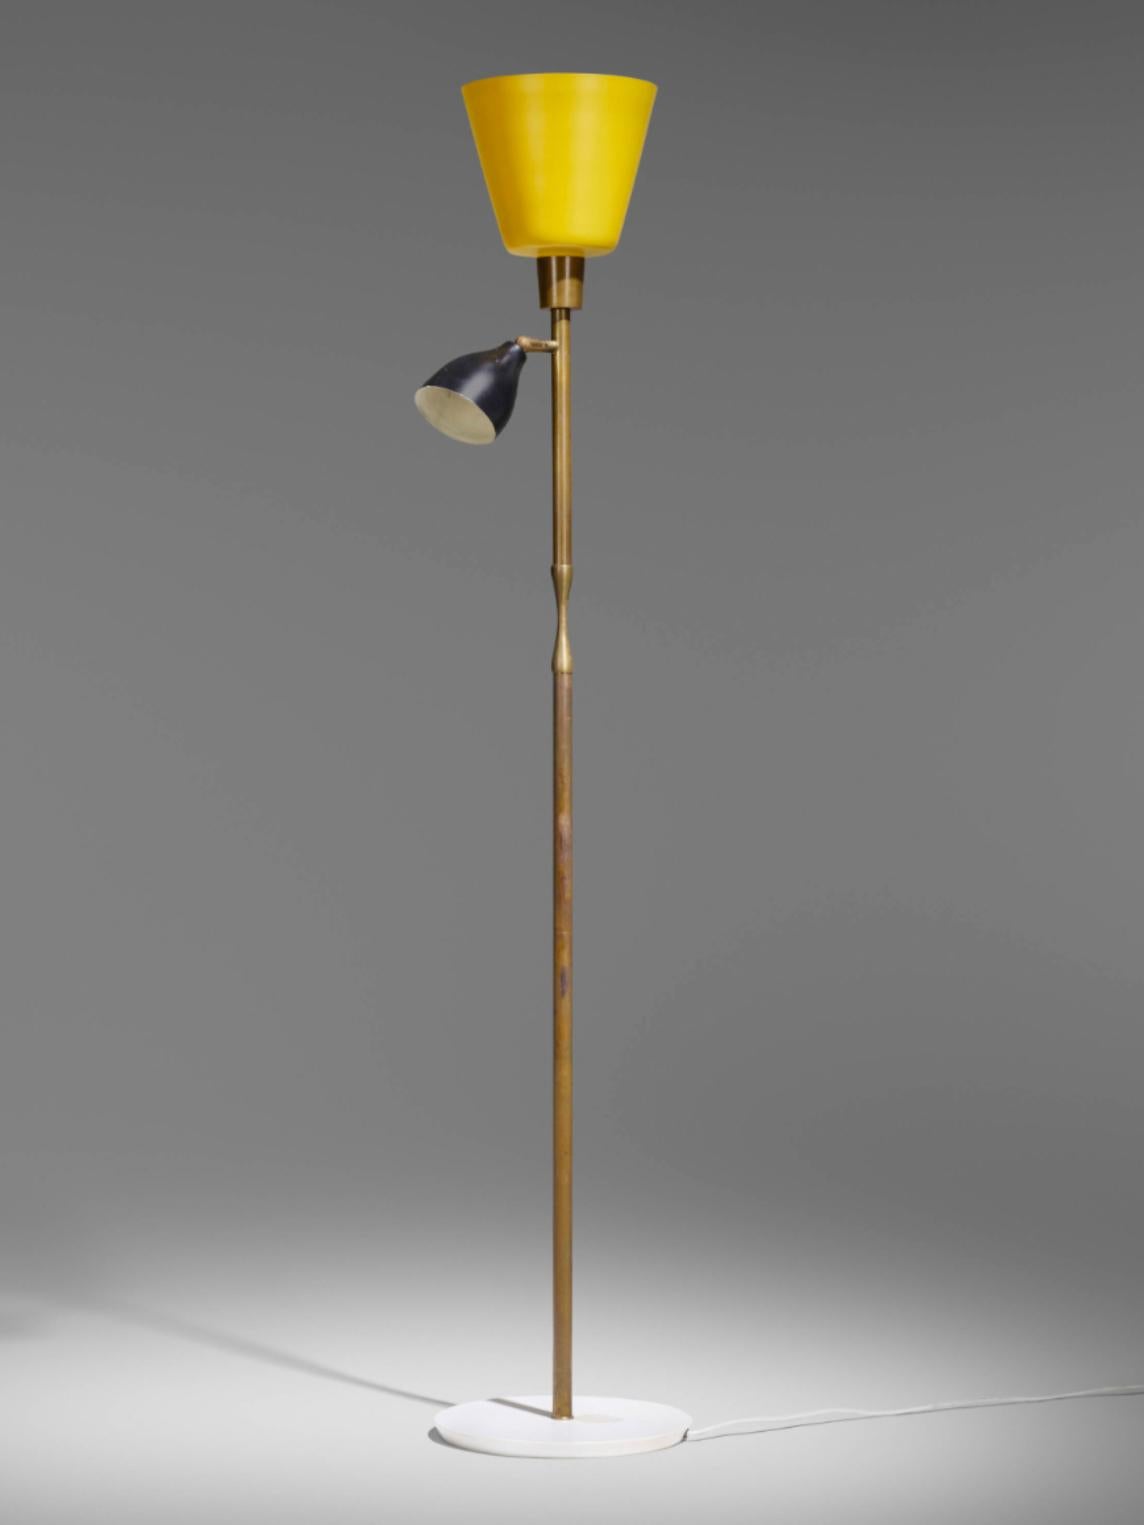 Angelo Lelii Floor Lamp for Arredoluce. Italy, c. 1950. Brass, marble, enameled aluminum, in perfect working condition.